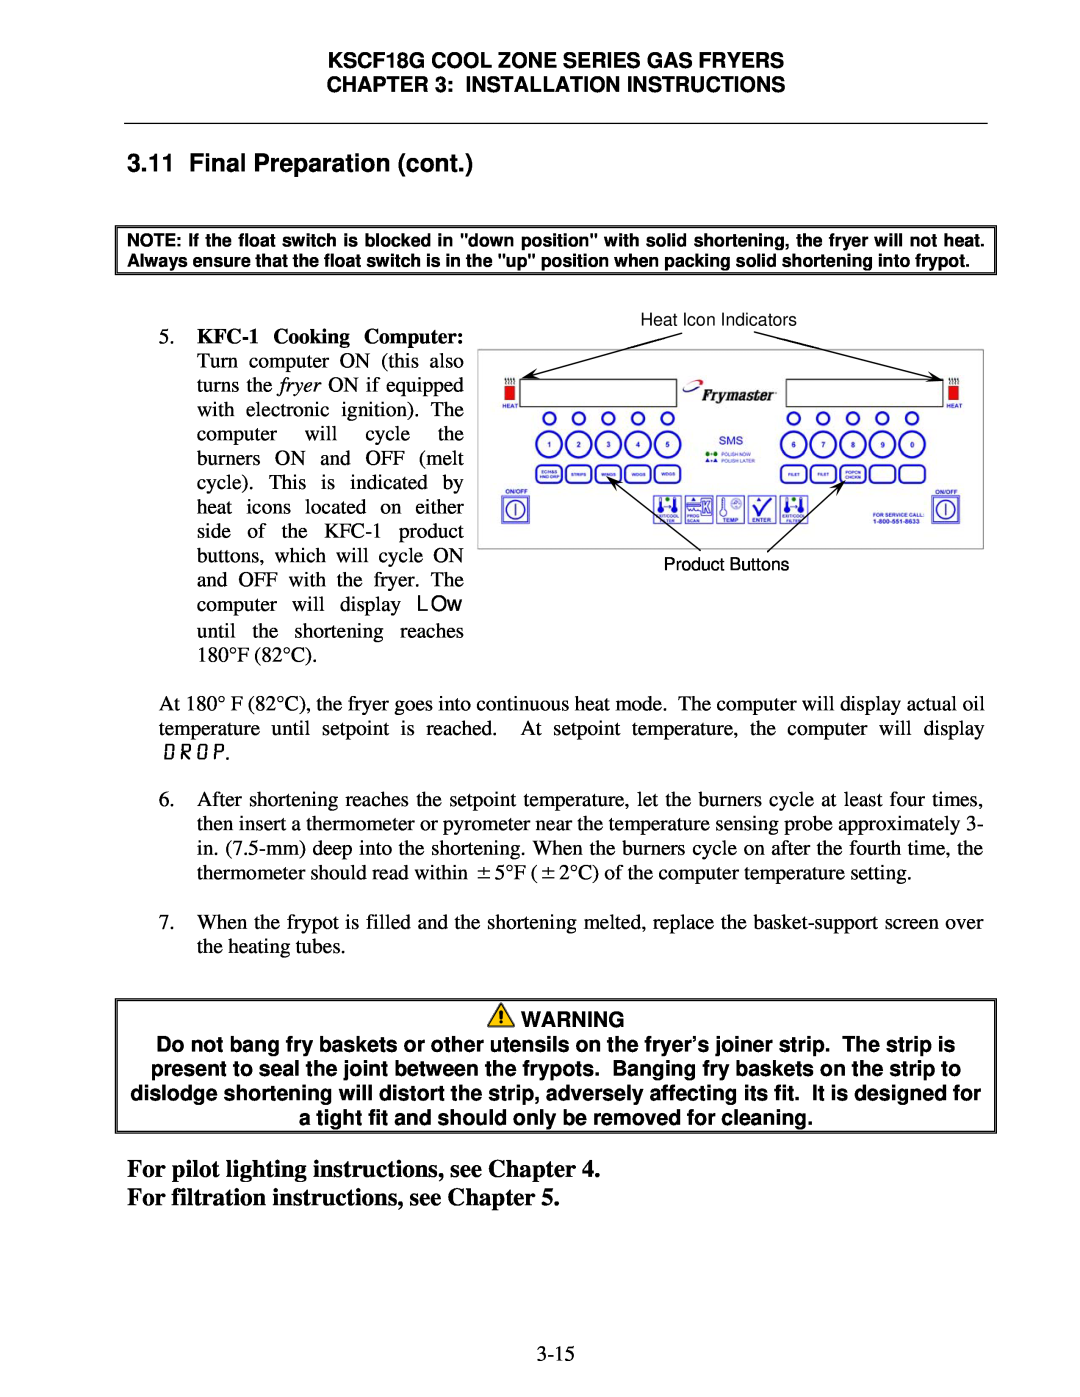 Frymaster KSCF18G manual Final Preparation cont, For pilot lighting instructions, see Chapter, Installation Instructions 